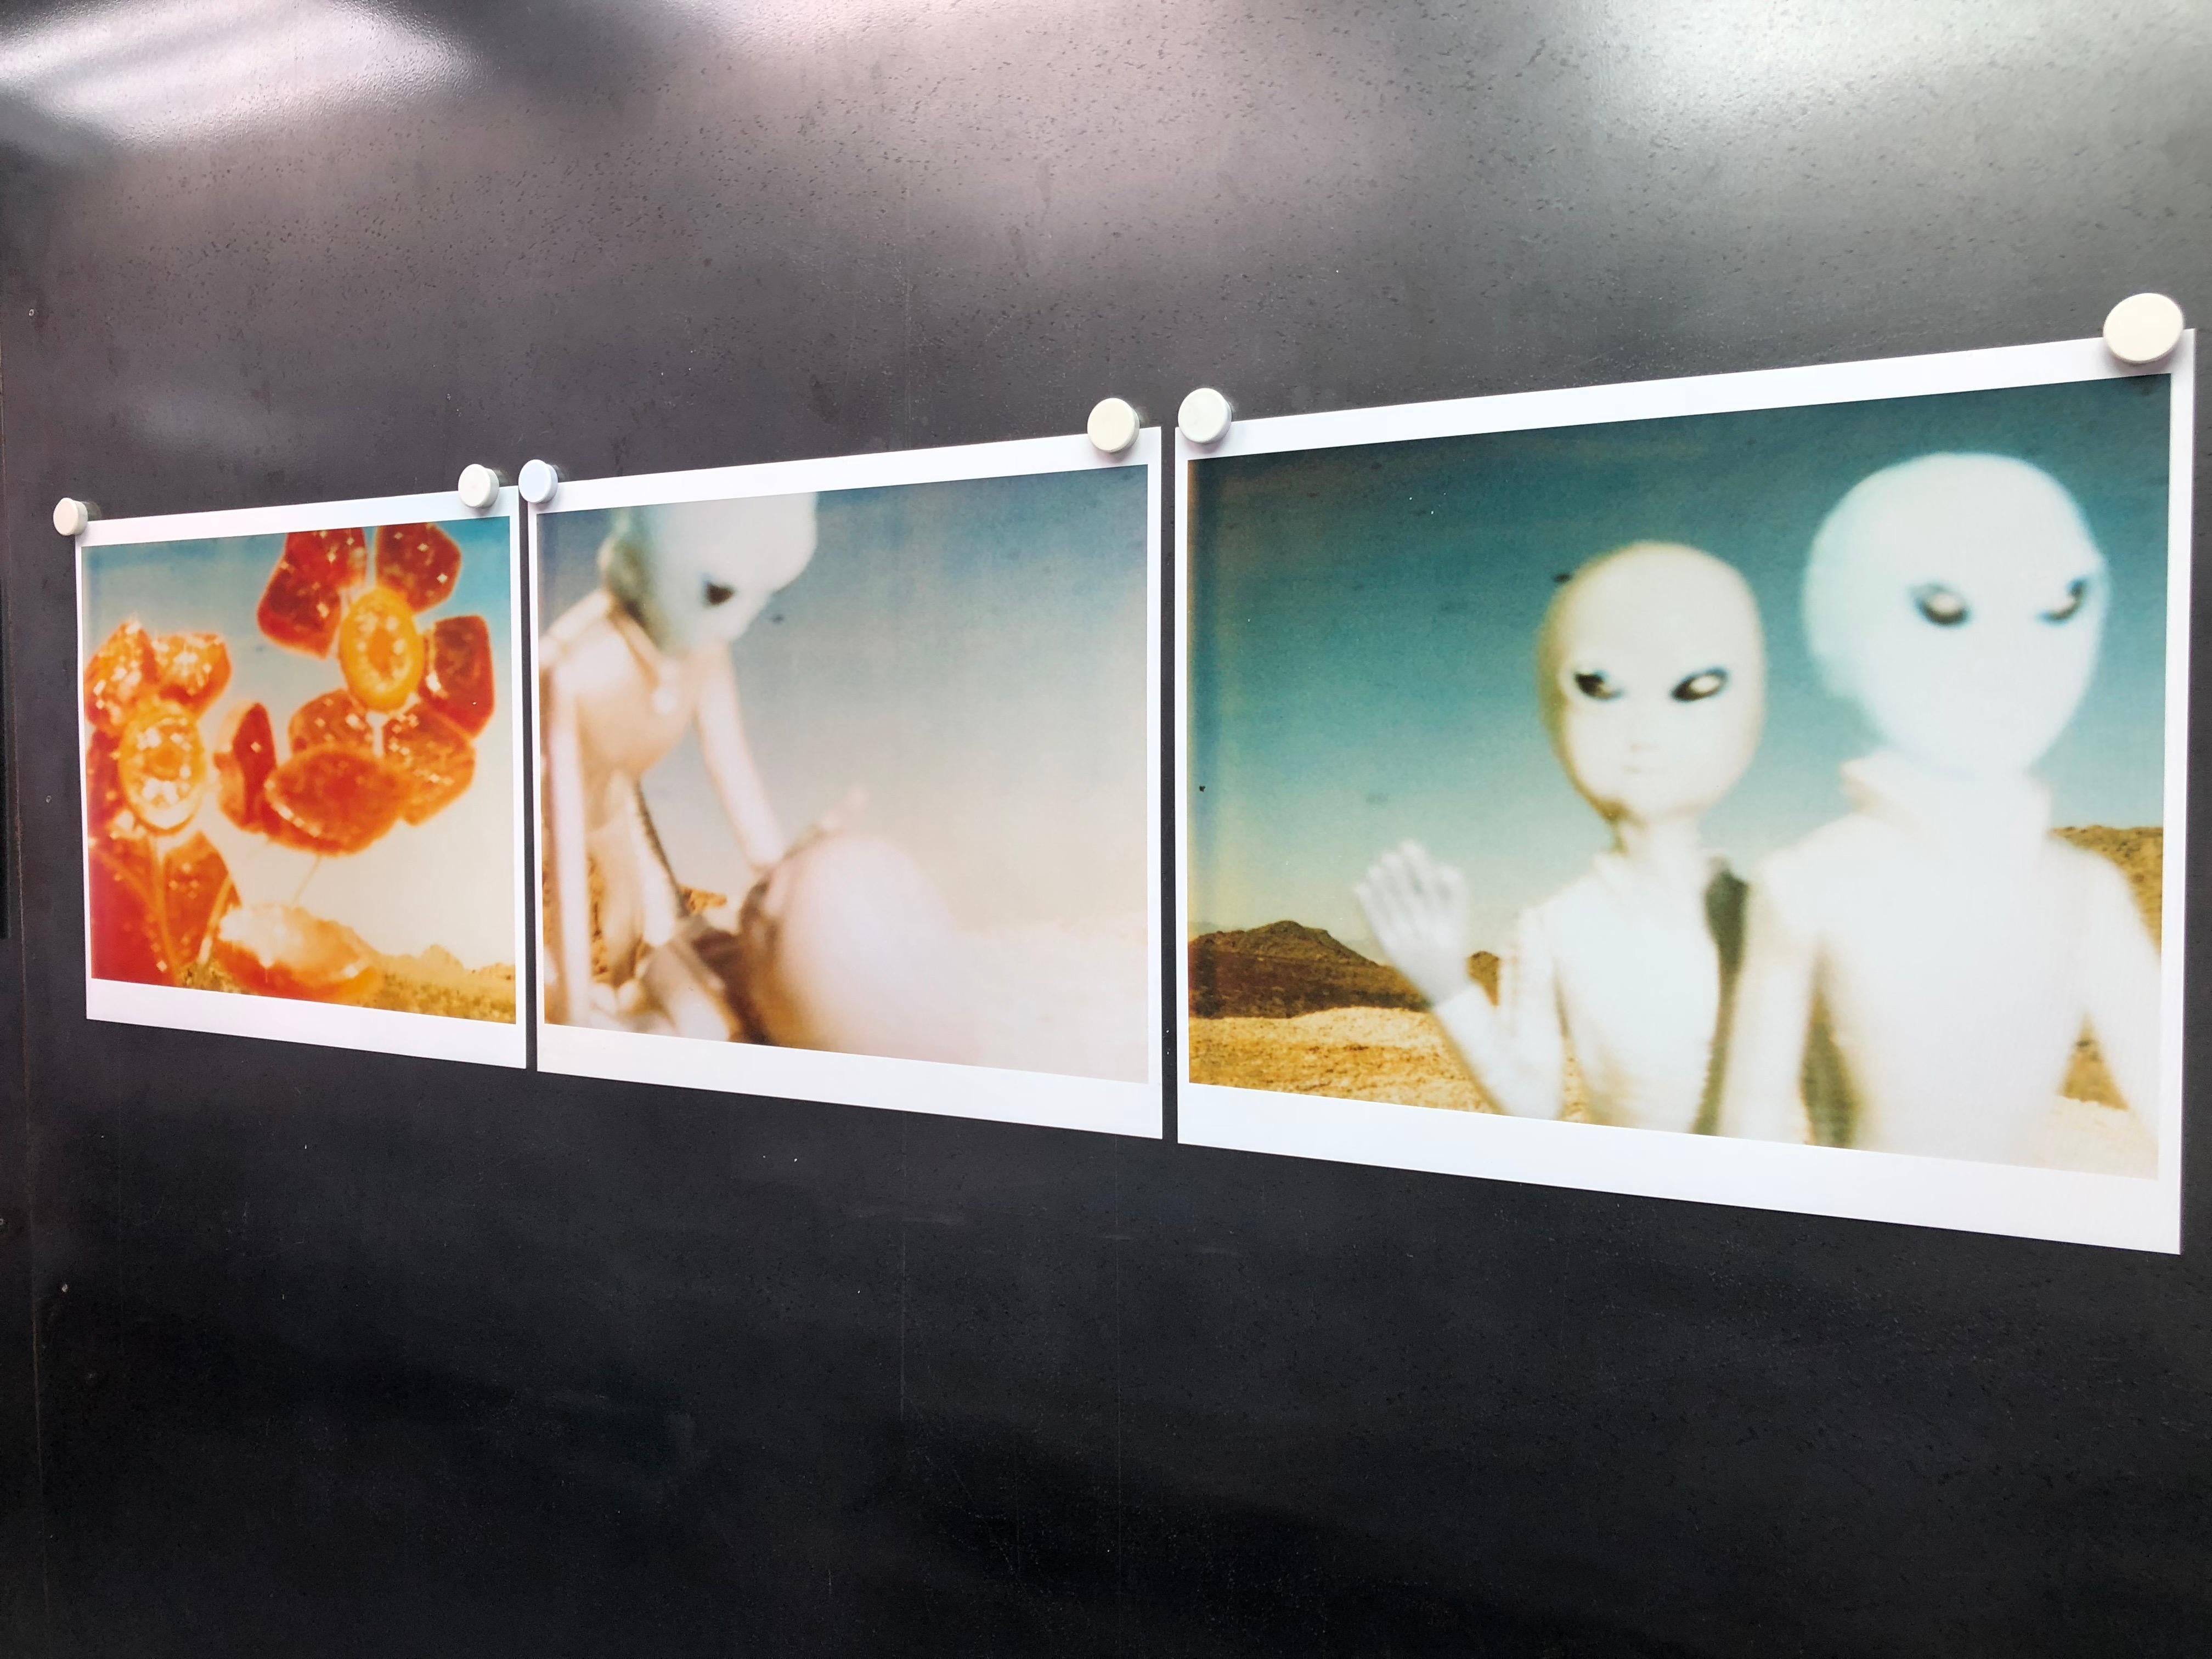 Aliens, triptych - 1998, 

Edition 2/5, 48x59cm each, 48x190 installed including the gaps.
analog C-Print, hand-printed by the artist on Fuji Crystal Achive Paper, matte finish, 
based on a Polaroid, Certificate and signature label
artist inventory